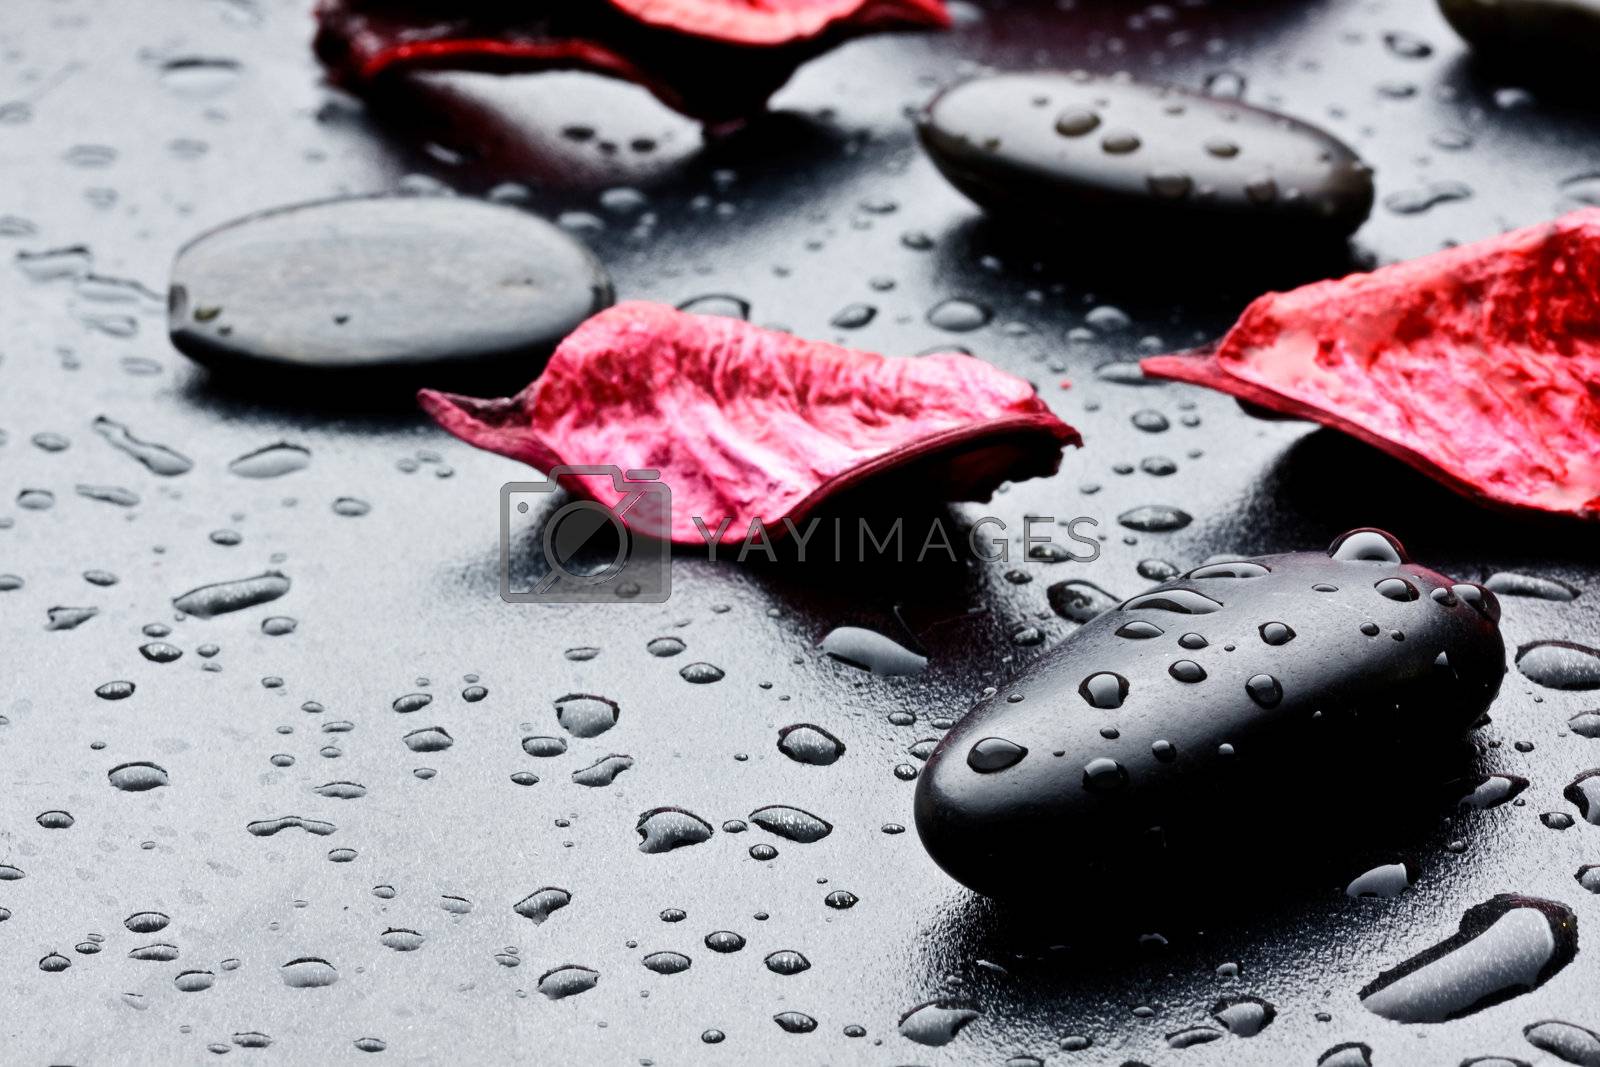 Royalty free image of wet black stones and petal by maxg71